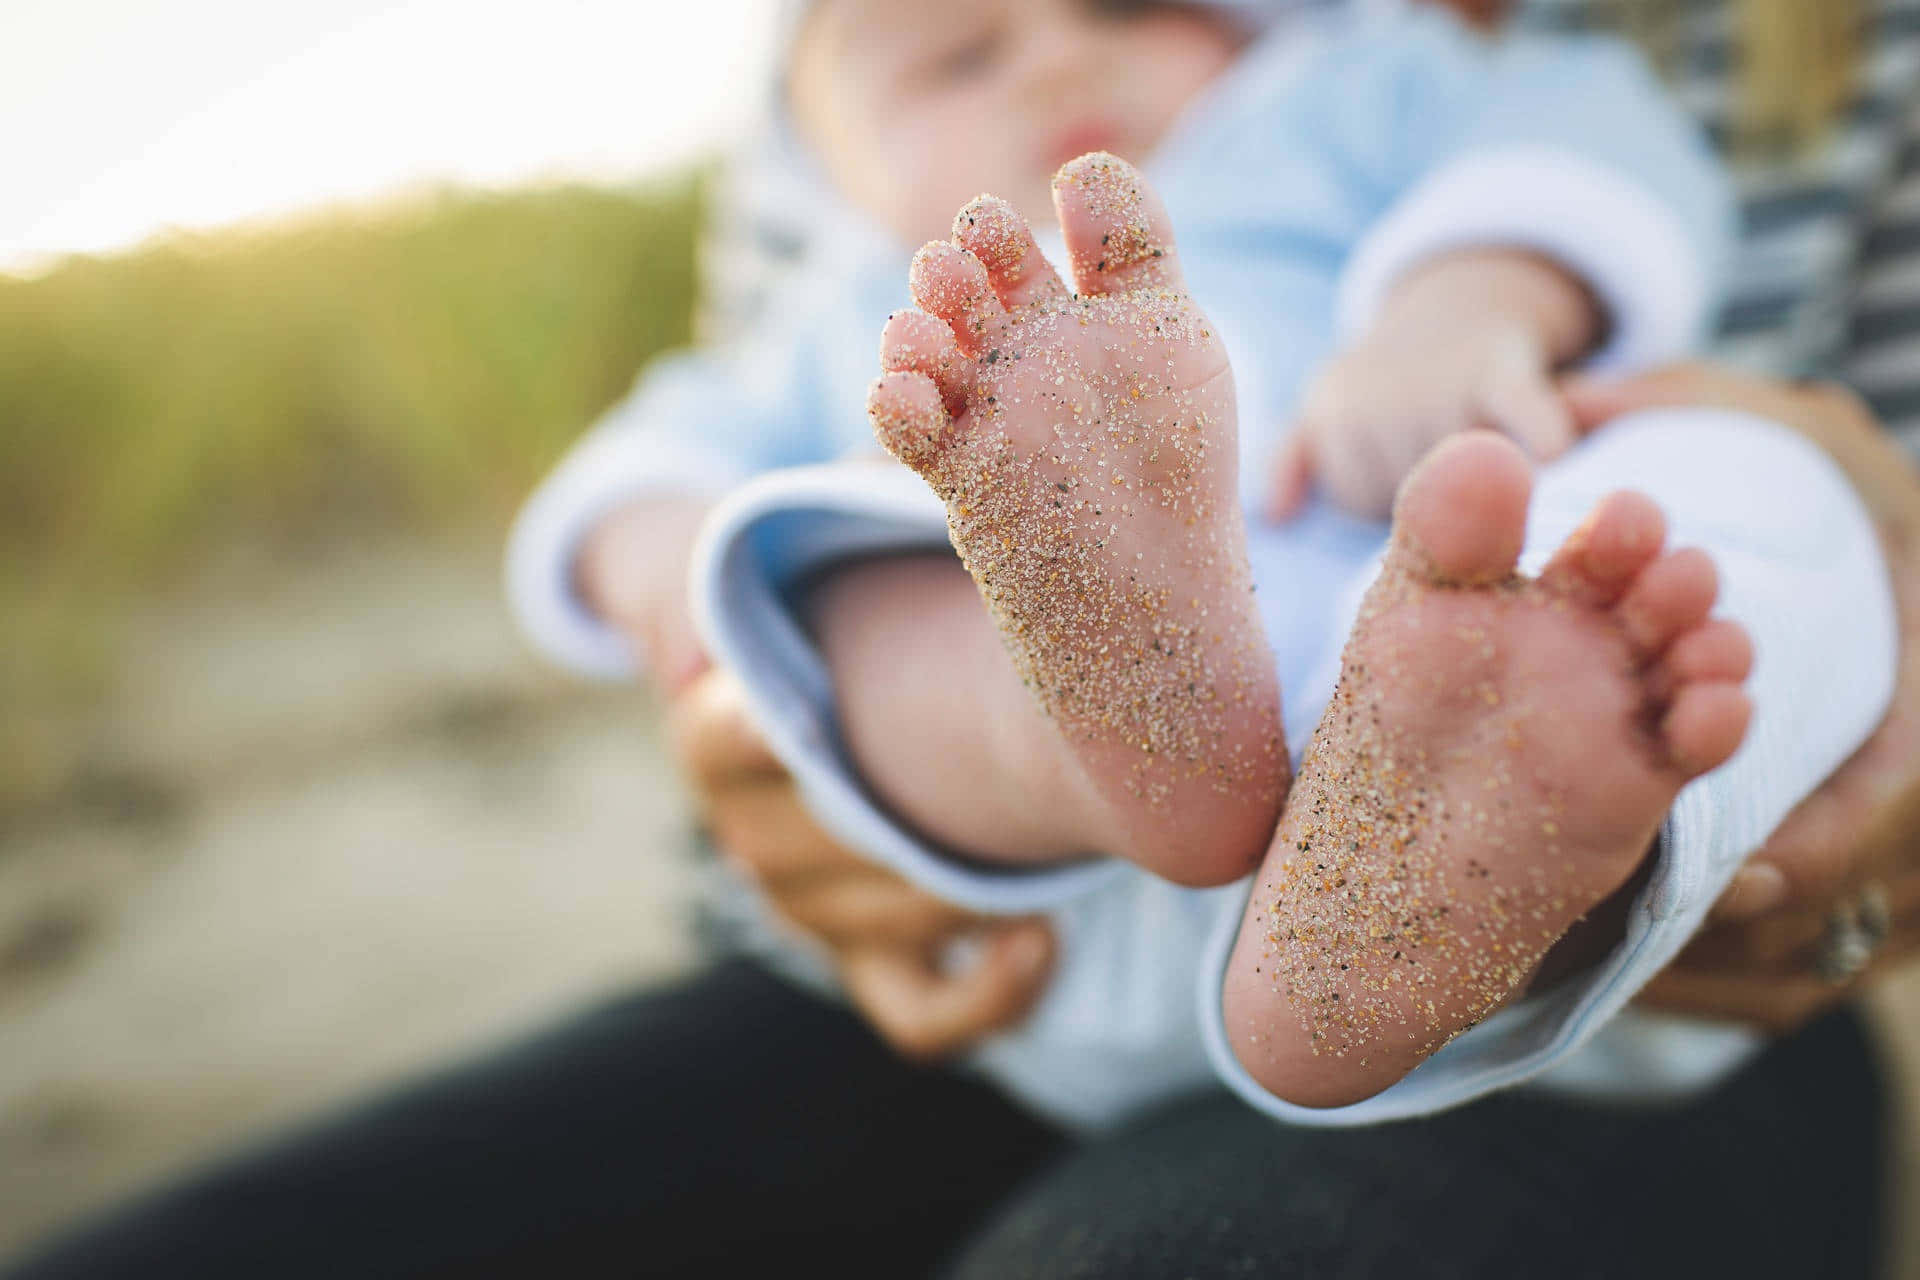 Relaxation Mode On: Close-up Shot Of Bare Feet On Grass